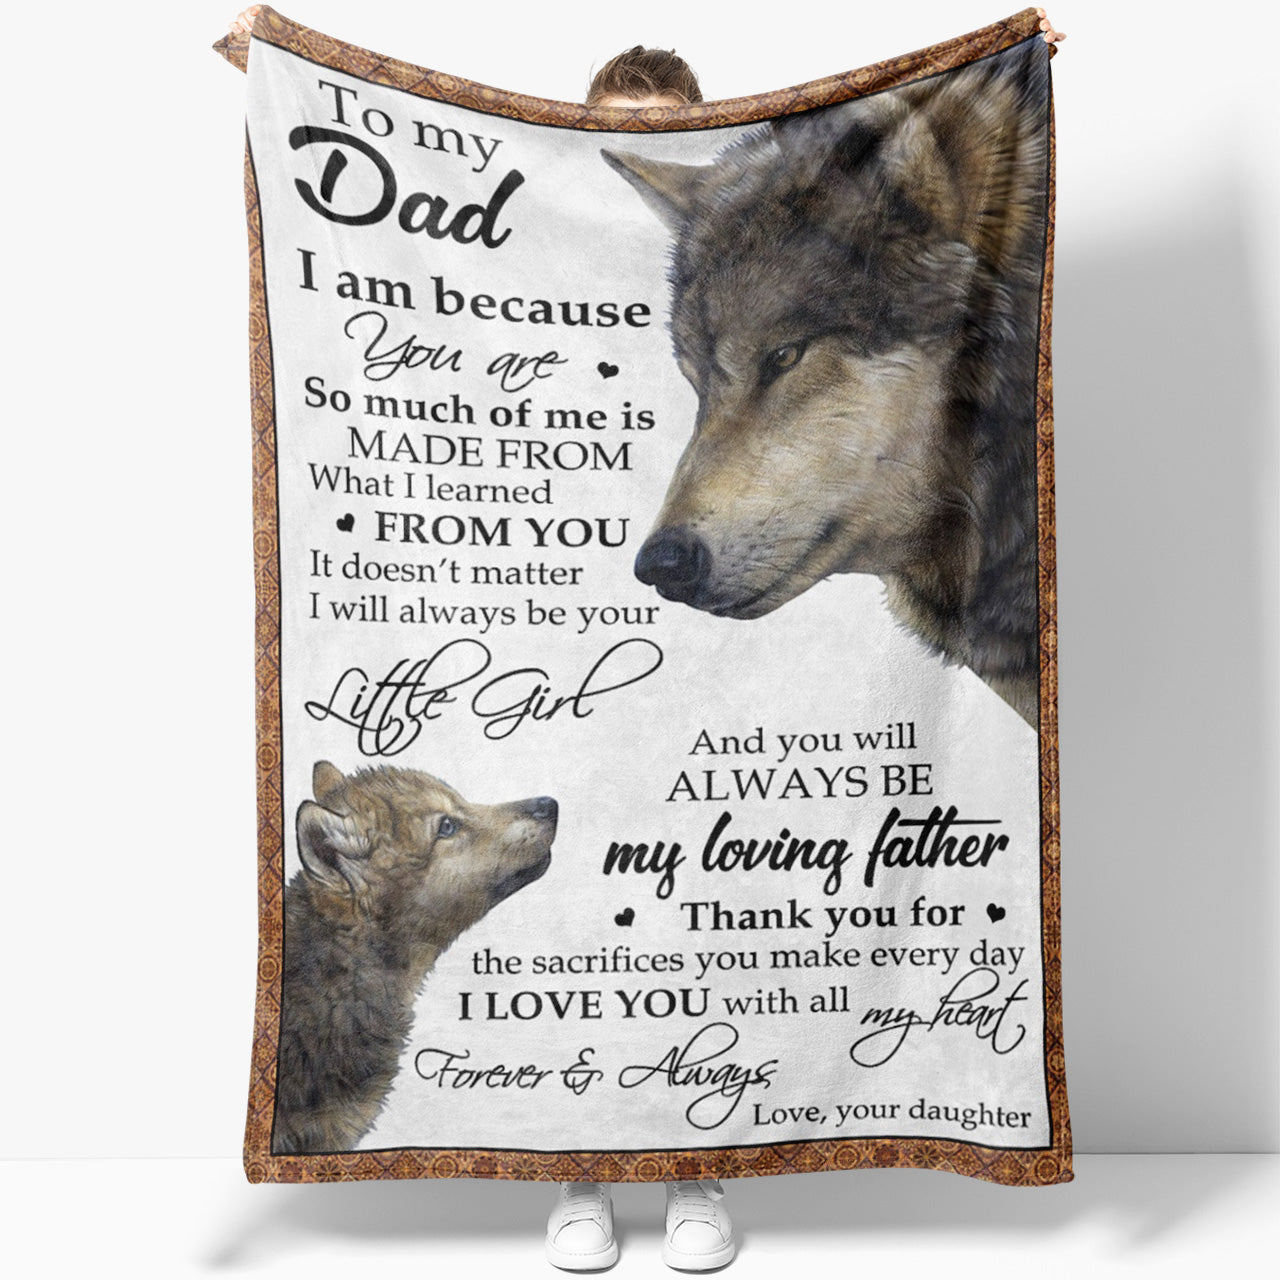 Blanket Gift ideas For Dad, Fathers Day, Christmas Gifts For Dad